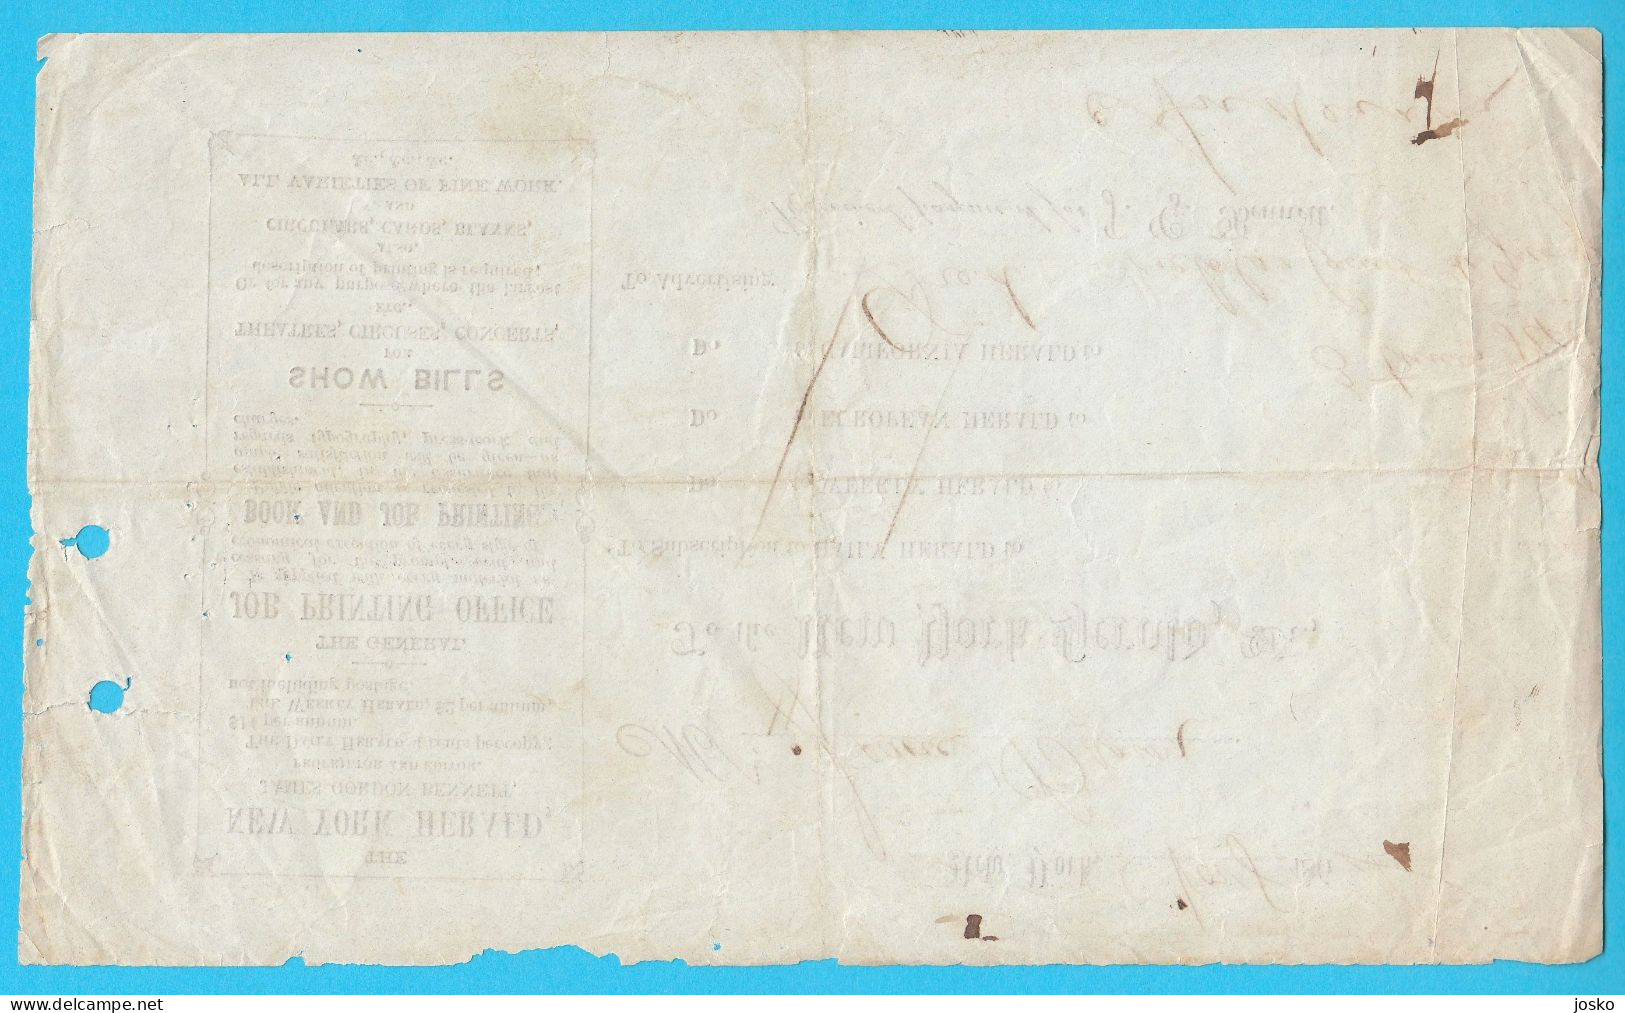 1864 Advertising Payment THE NEW YORK HERALD - Original Vintage Payment Receipt * USA United States Of America - United States